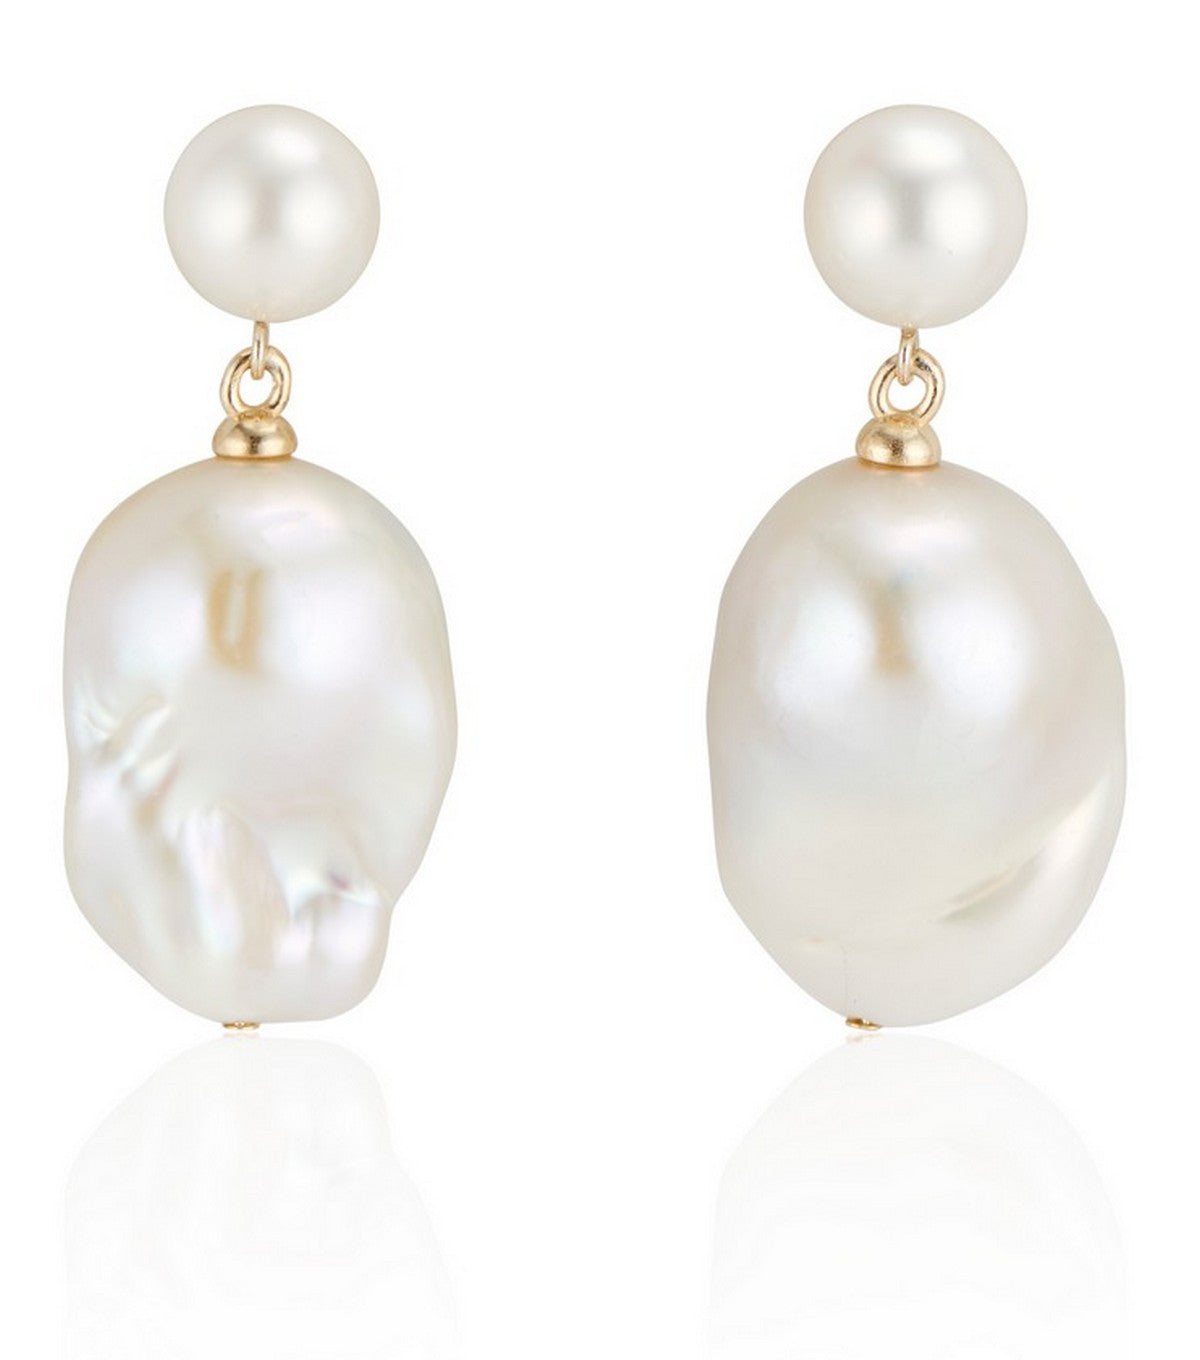 Double Bubble White Baroque Pearl Earrings - Thomas Laine Jewelry